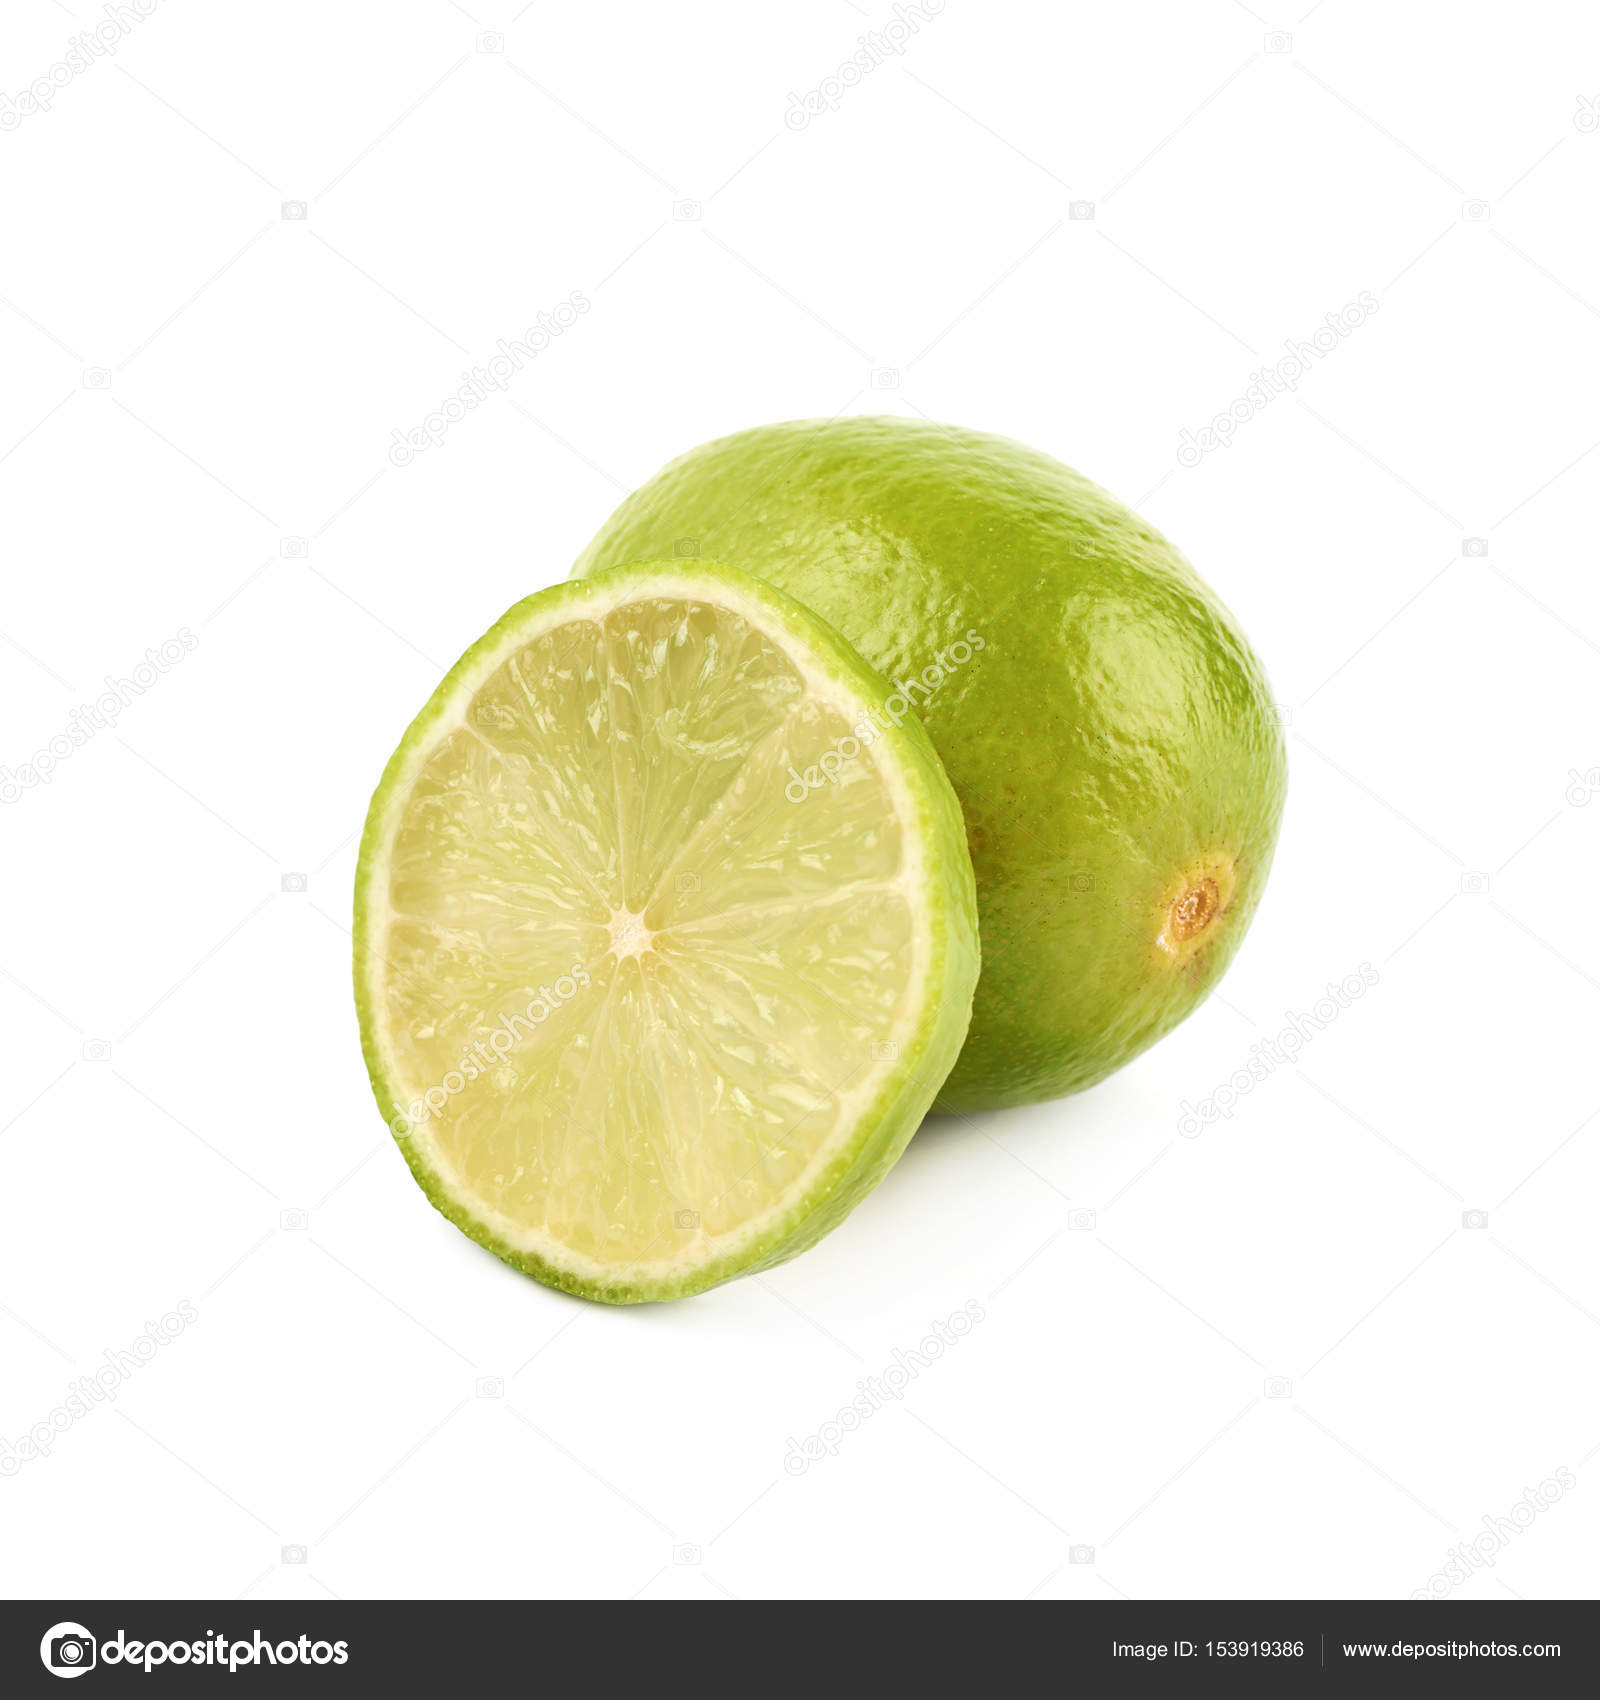 Sliced lime fruit isolated — Stock Photo © nbvf89 #153919386